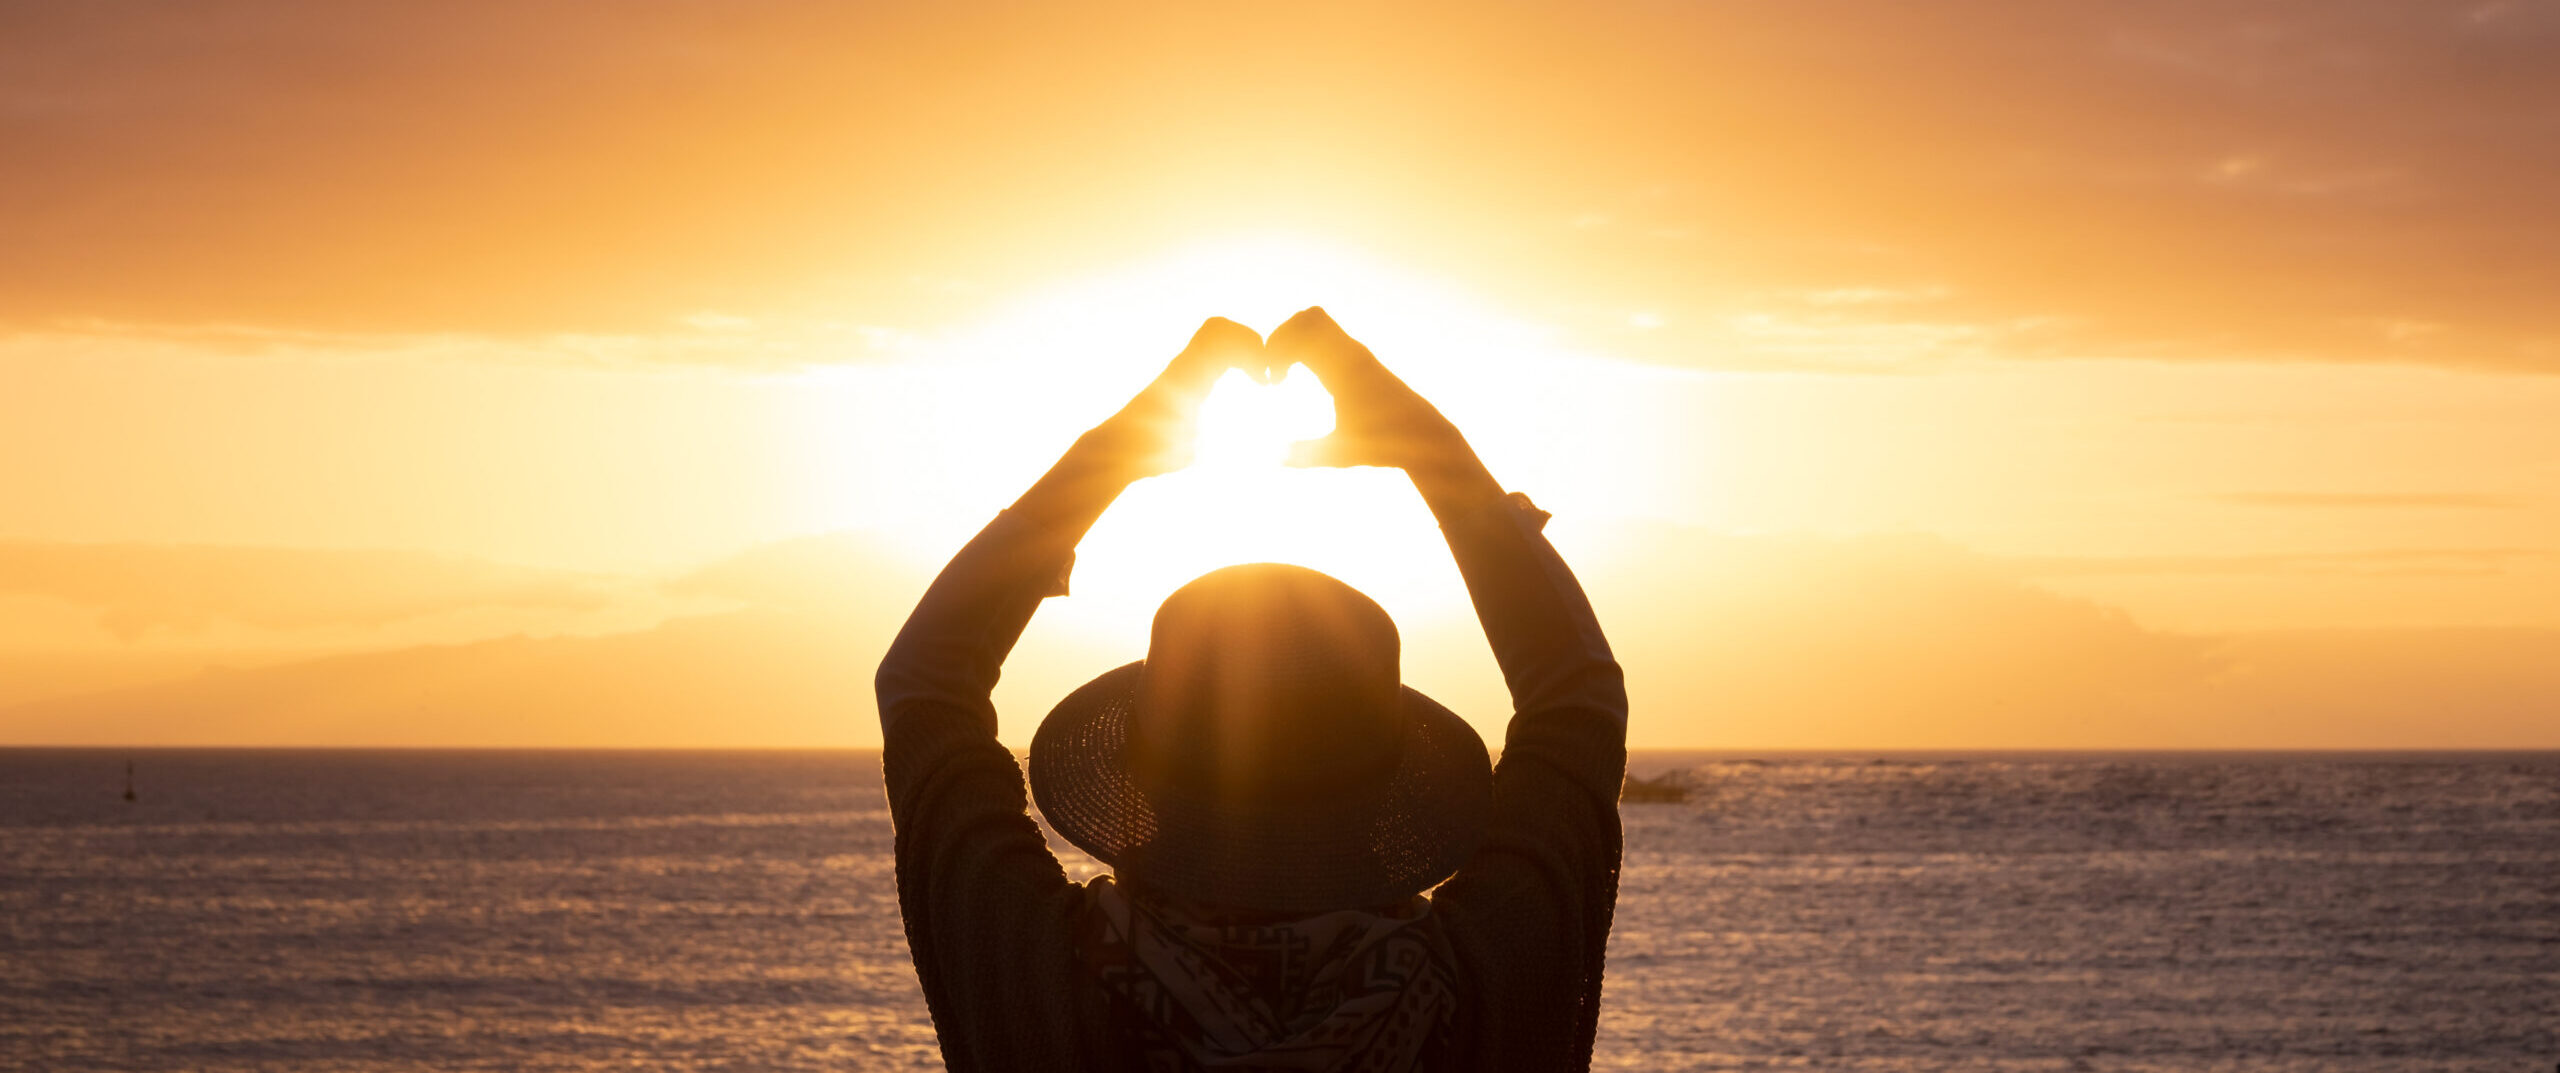 Rear view of woman silhouette admiring the orange sunset over the sea doing heart shape with her hands. Love and peace concept in beautiful nature